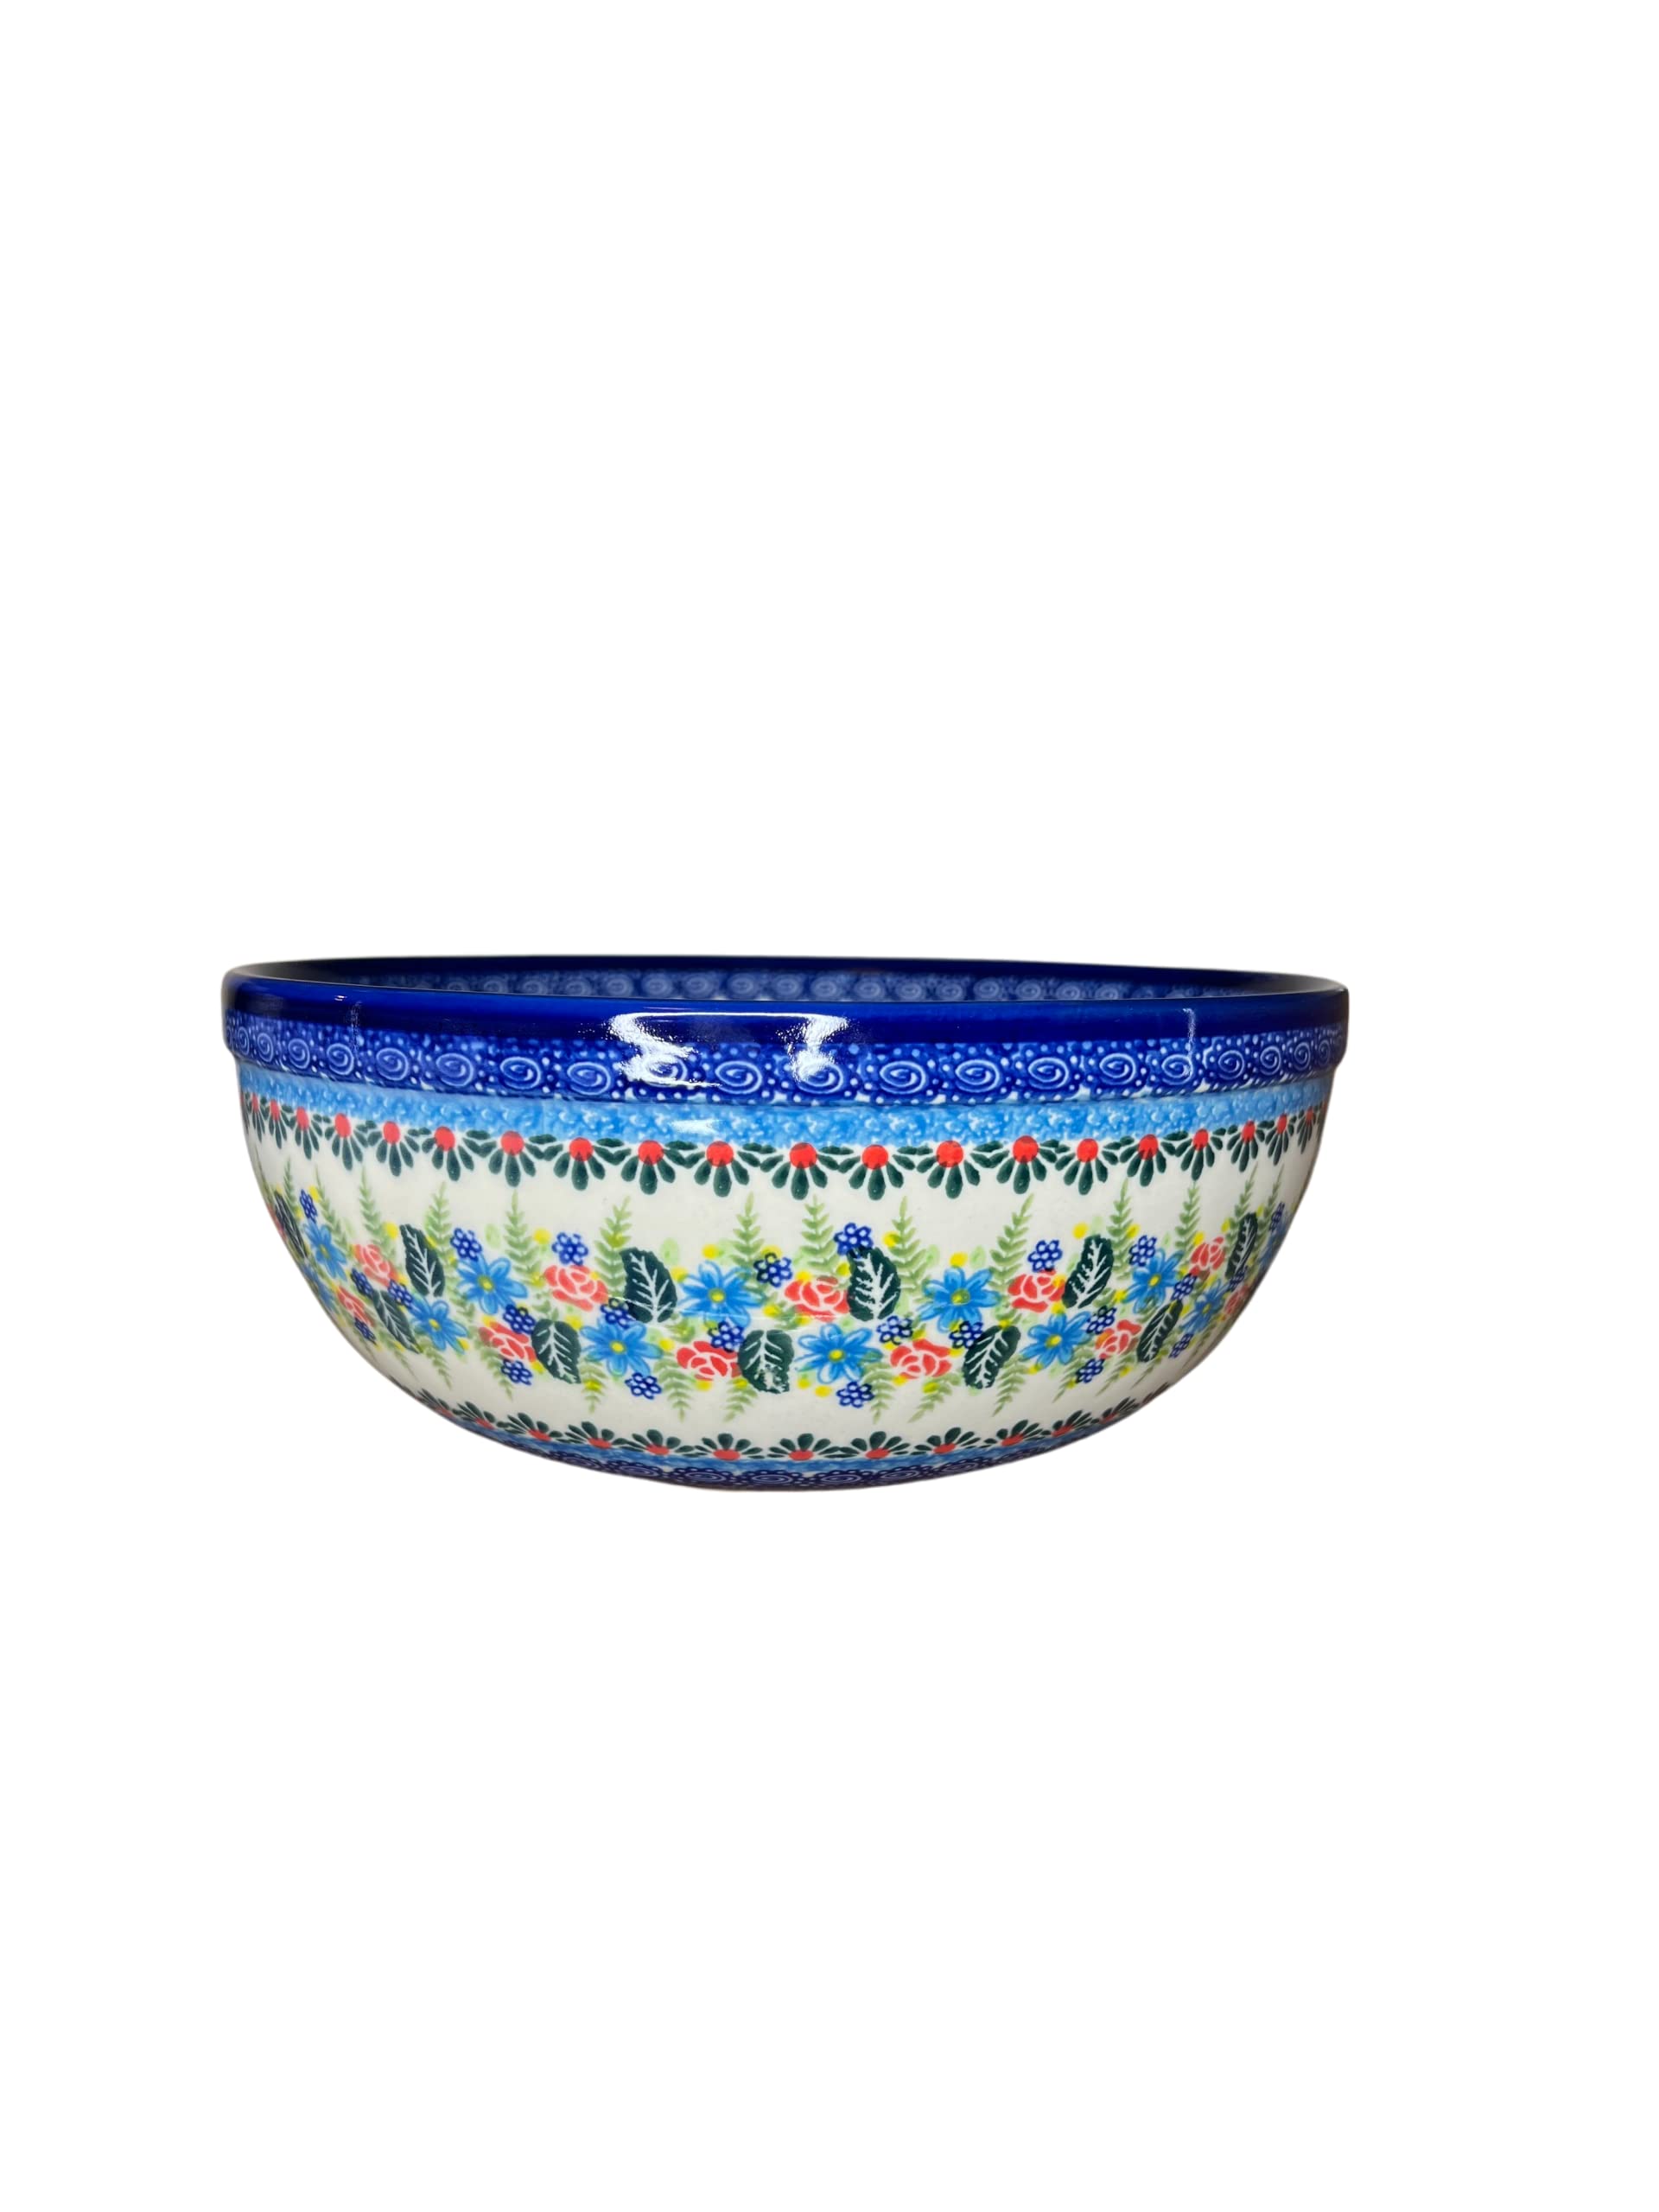 Lidia's Polish Pottery 10 cup 9.25 inch Serving Bowl- Ceramika Kalich- Daisy